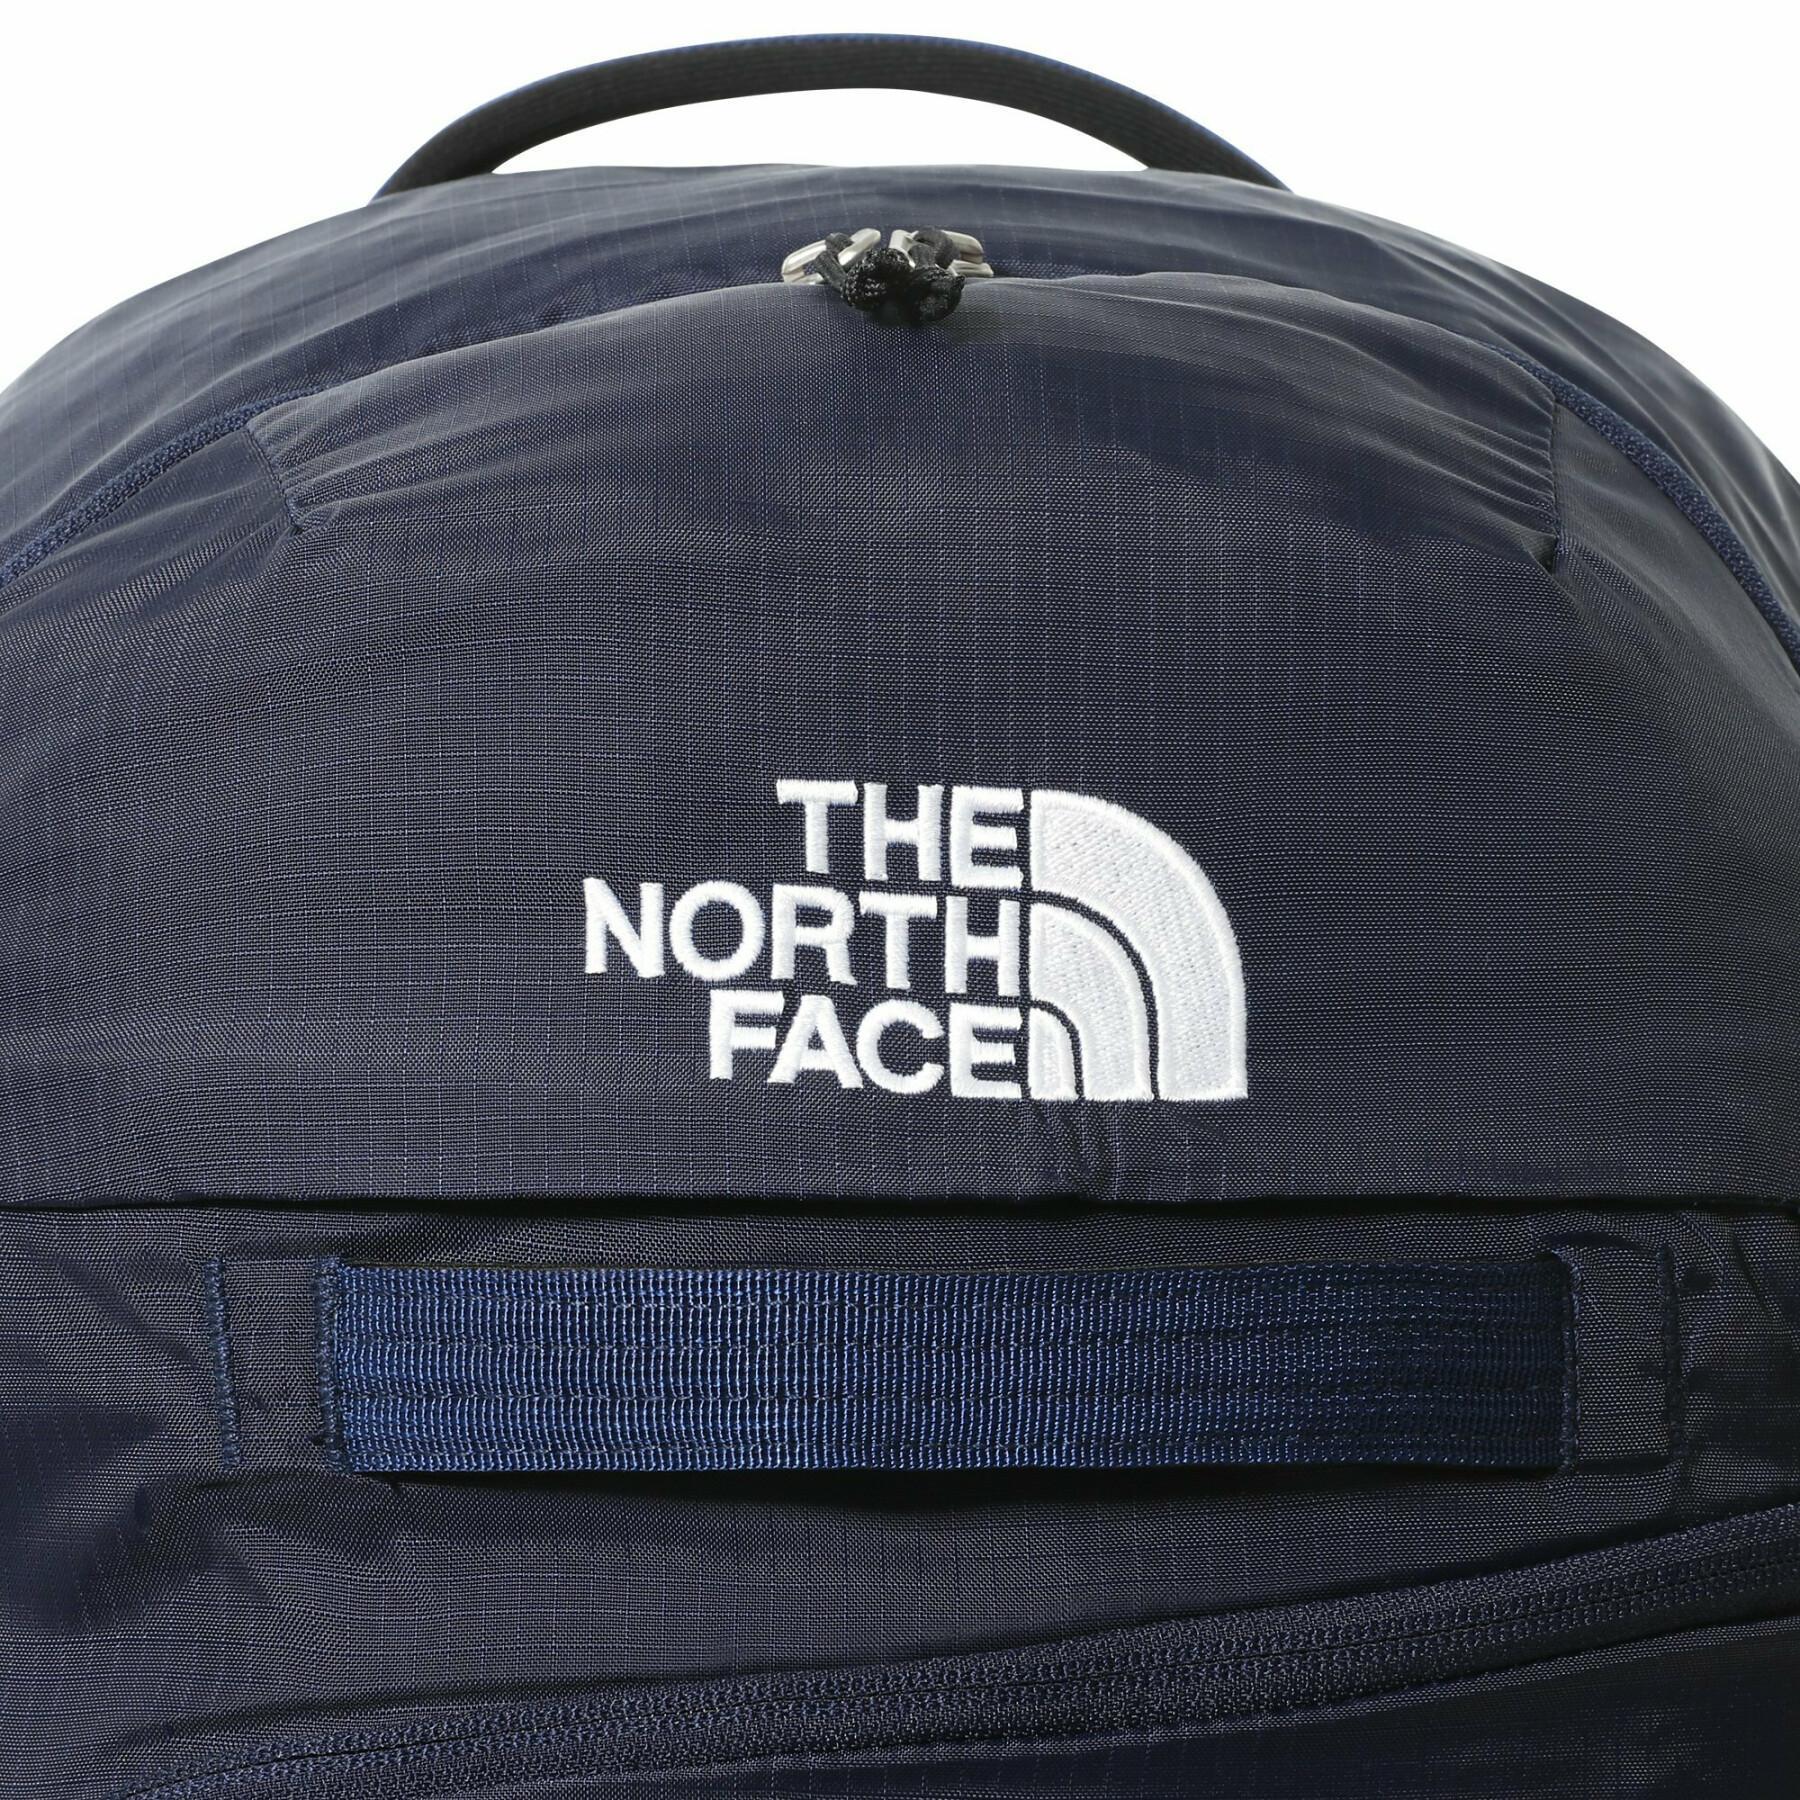 Rugzak The North Face Router